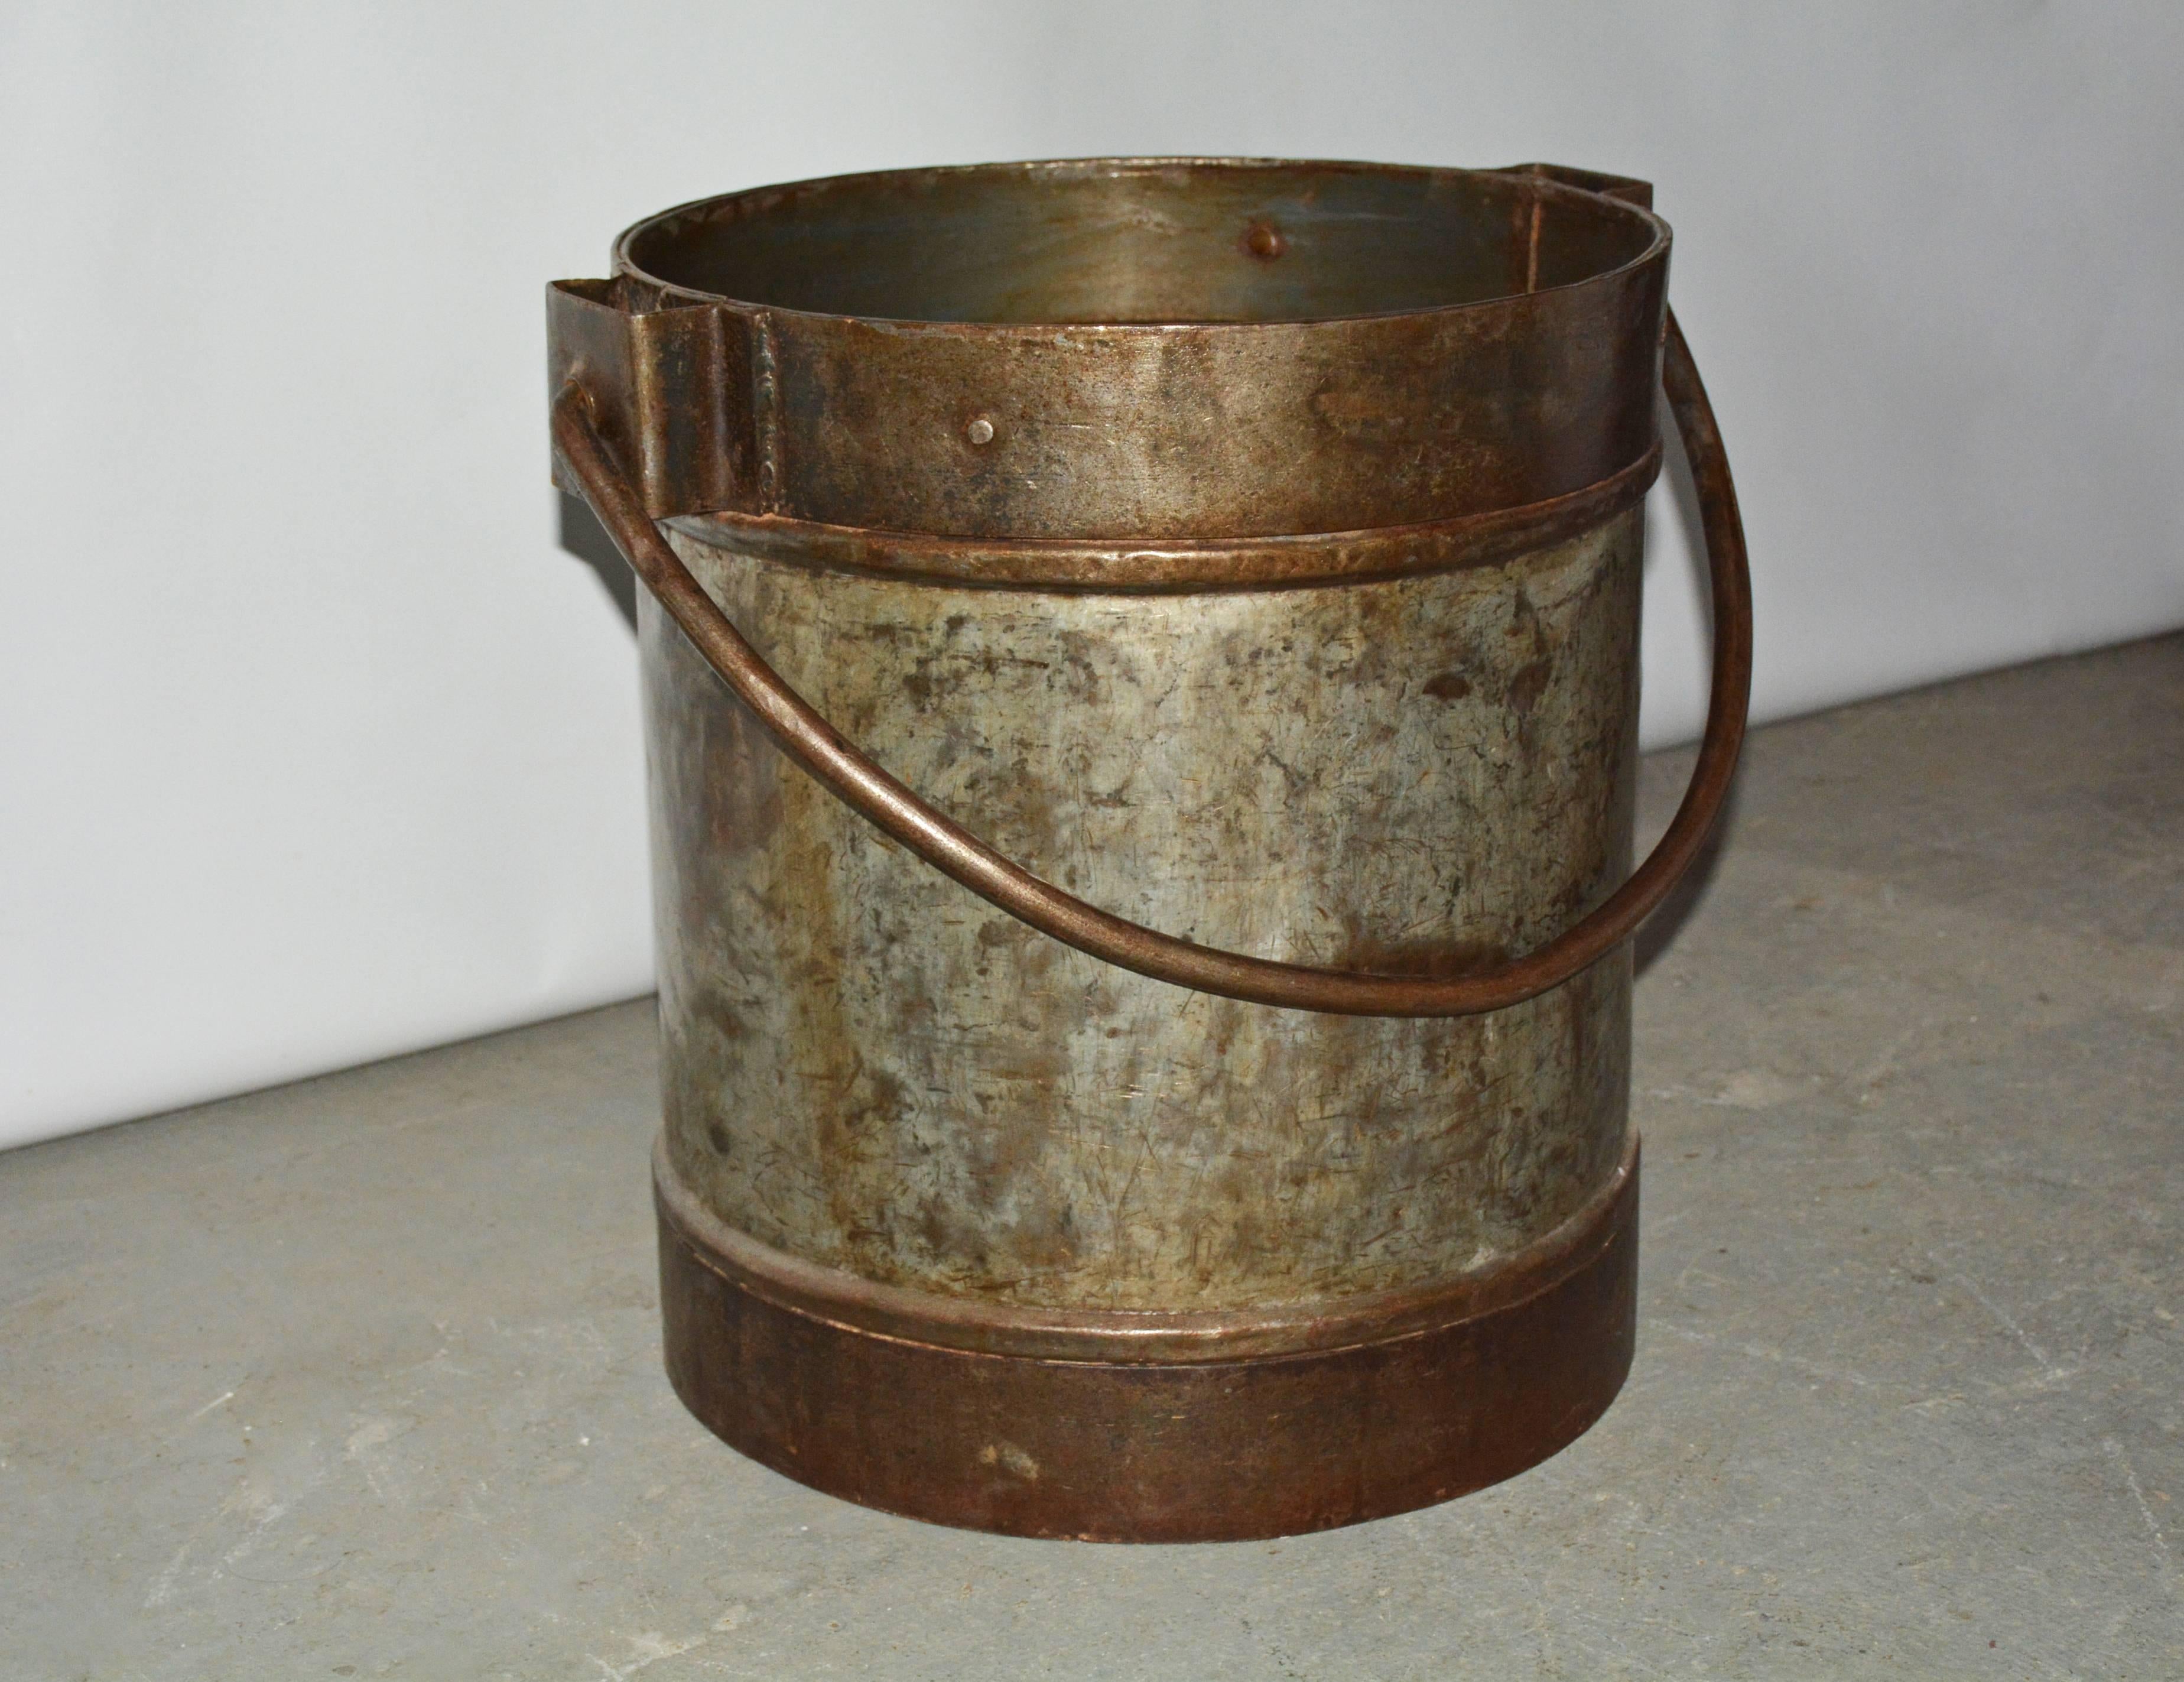 Wonderful antique Industrial iron metal bucket can be used for logs and kindling or put a piece of glass, wood or stone on top and use as a side or end table.

Measures: Width 20.75